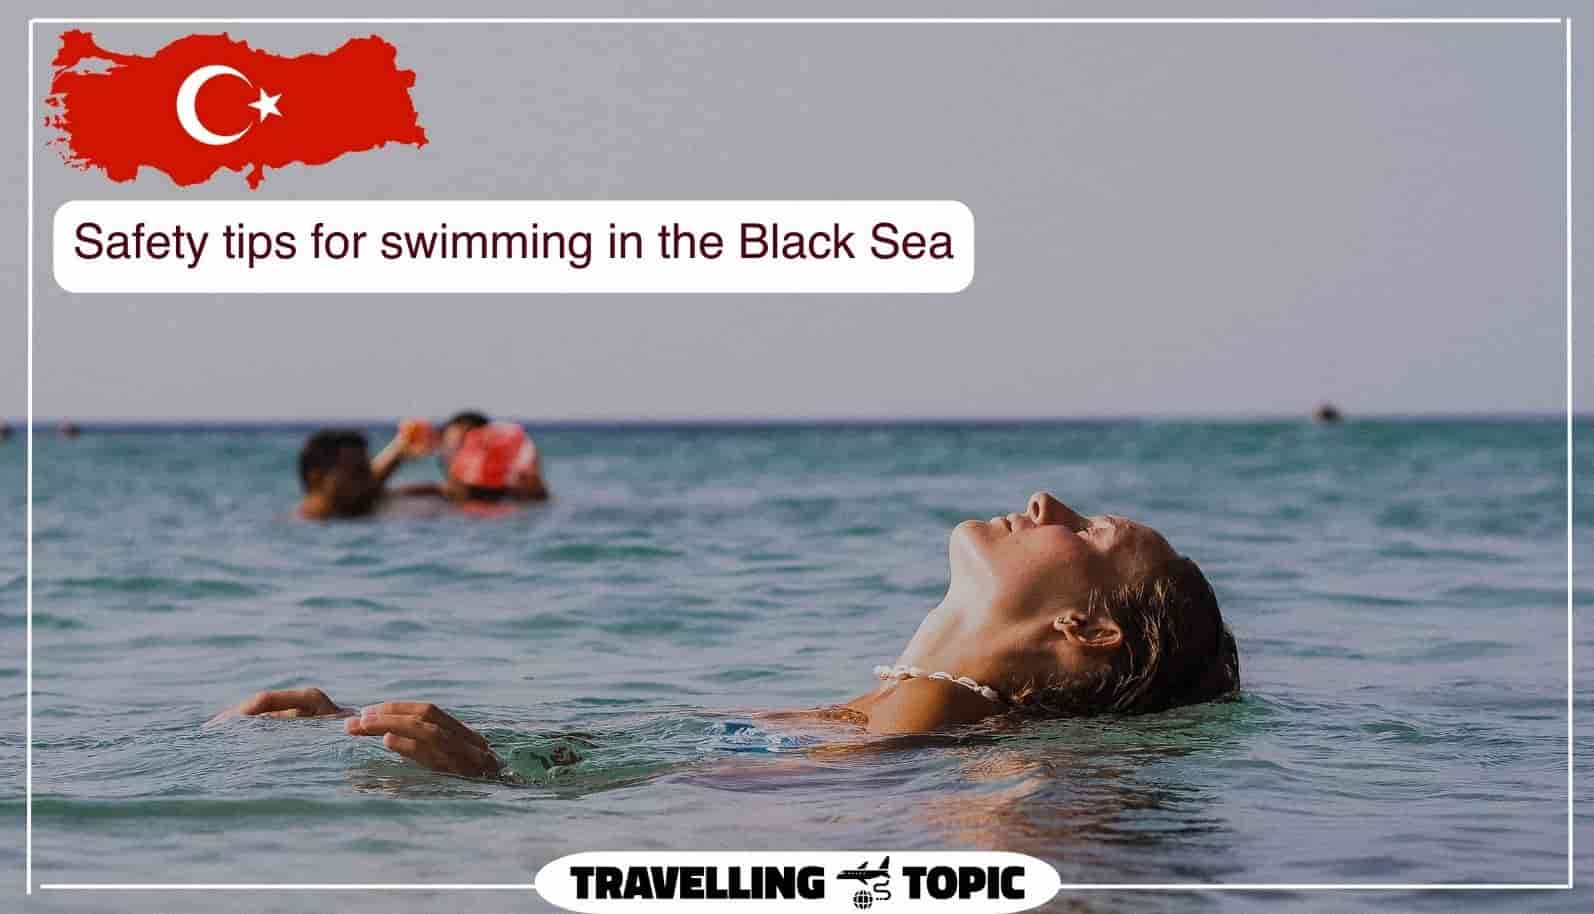 Safety tips for swimming in the Black Sea